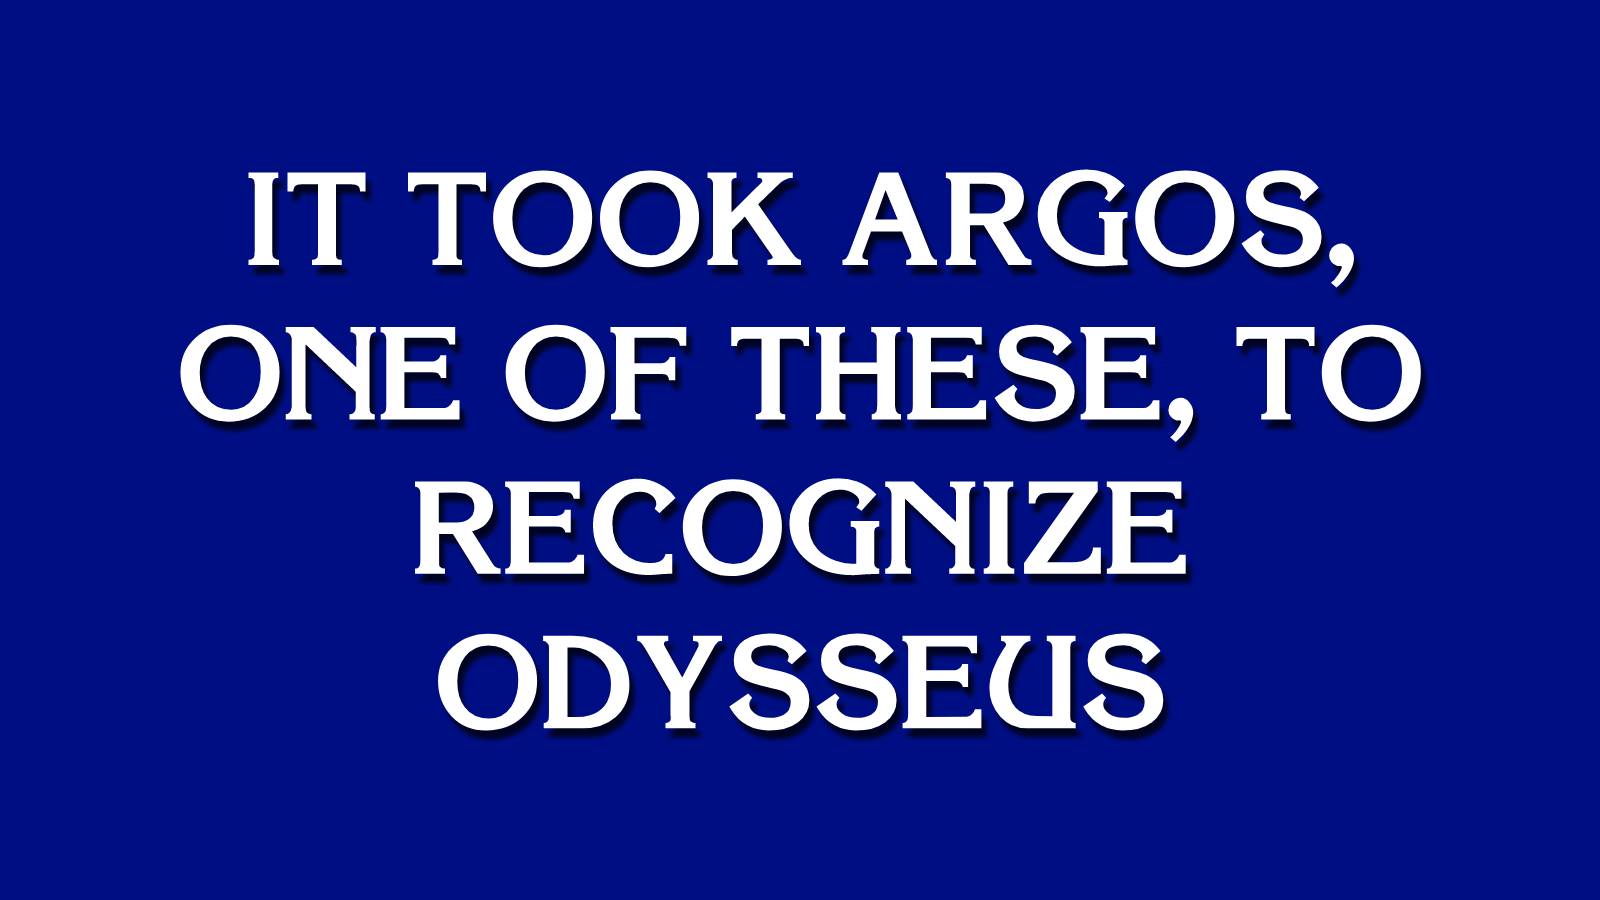 Do You Have the Smarts to Win This Game of “Jeopardy!”? Template Jeopardy 15